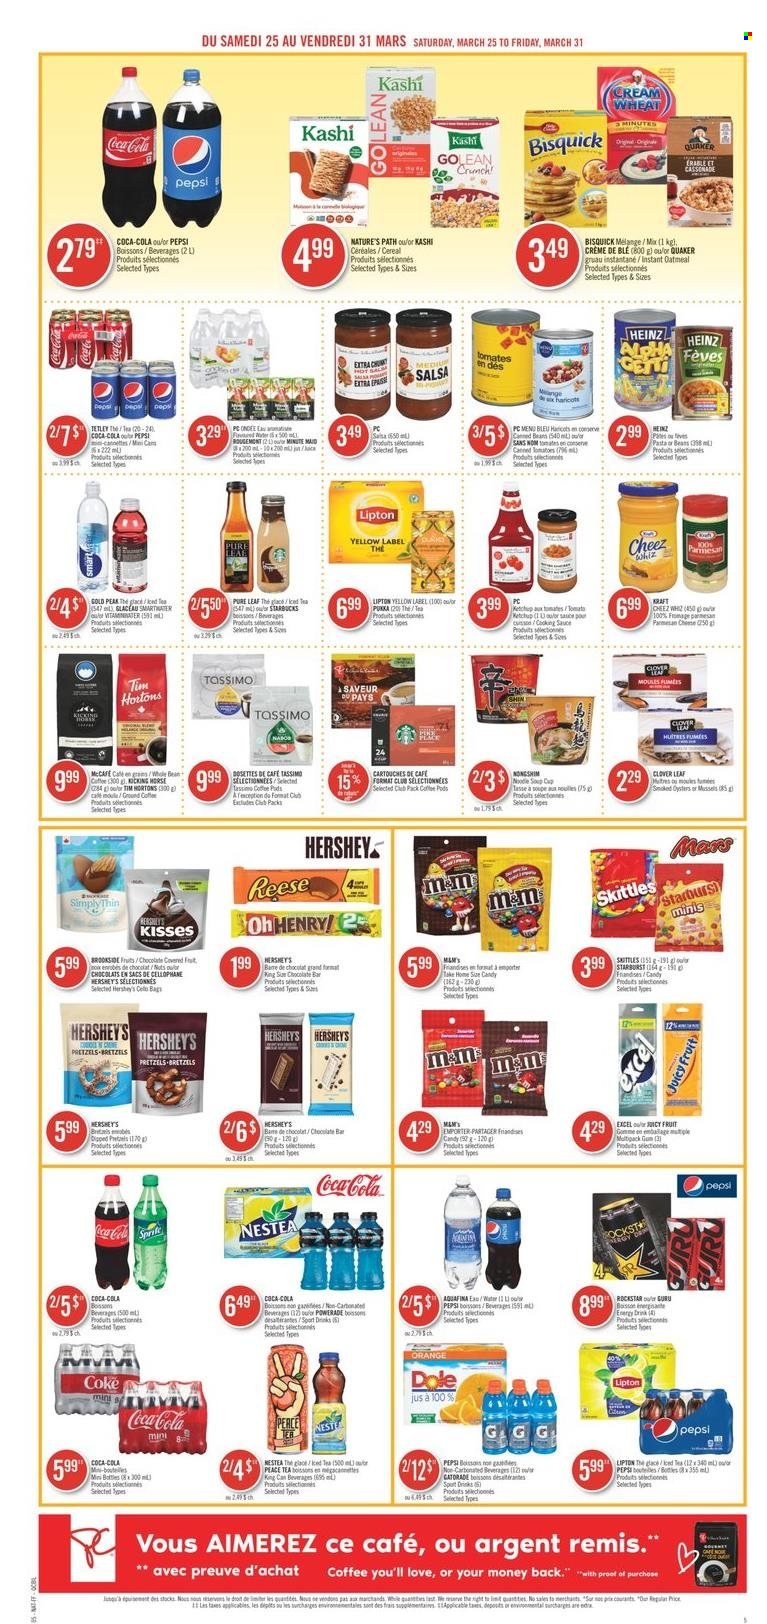 thumbnail - Pharmaprix Flyer - March 25, 2023 - March 31, 2023 - Sales products - pretzels, Dole, oranges, smoked oysters, oysters, soup, noodles cup, Quaker, noodles, Kraft®, parmesan, cheese, Clover, Hershey's, Mars, Skittles, Starburst, chocolate bar, Bisquick, oatmeal, cereals, salsa, Coca-Cola, Sprite, Powerade, Pepsi, energy drink, ice tea, Rockstar, Gatorade, fruit punch, Coke, Aquafina, Smartwater, water, Pure Leaf, coffee, Starbucks, McCafe, bag, cup, Cello, Heinz, ketchup, Lipton. Page 7.